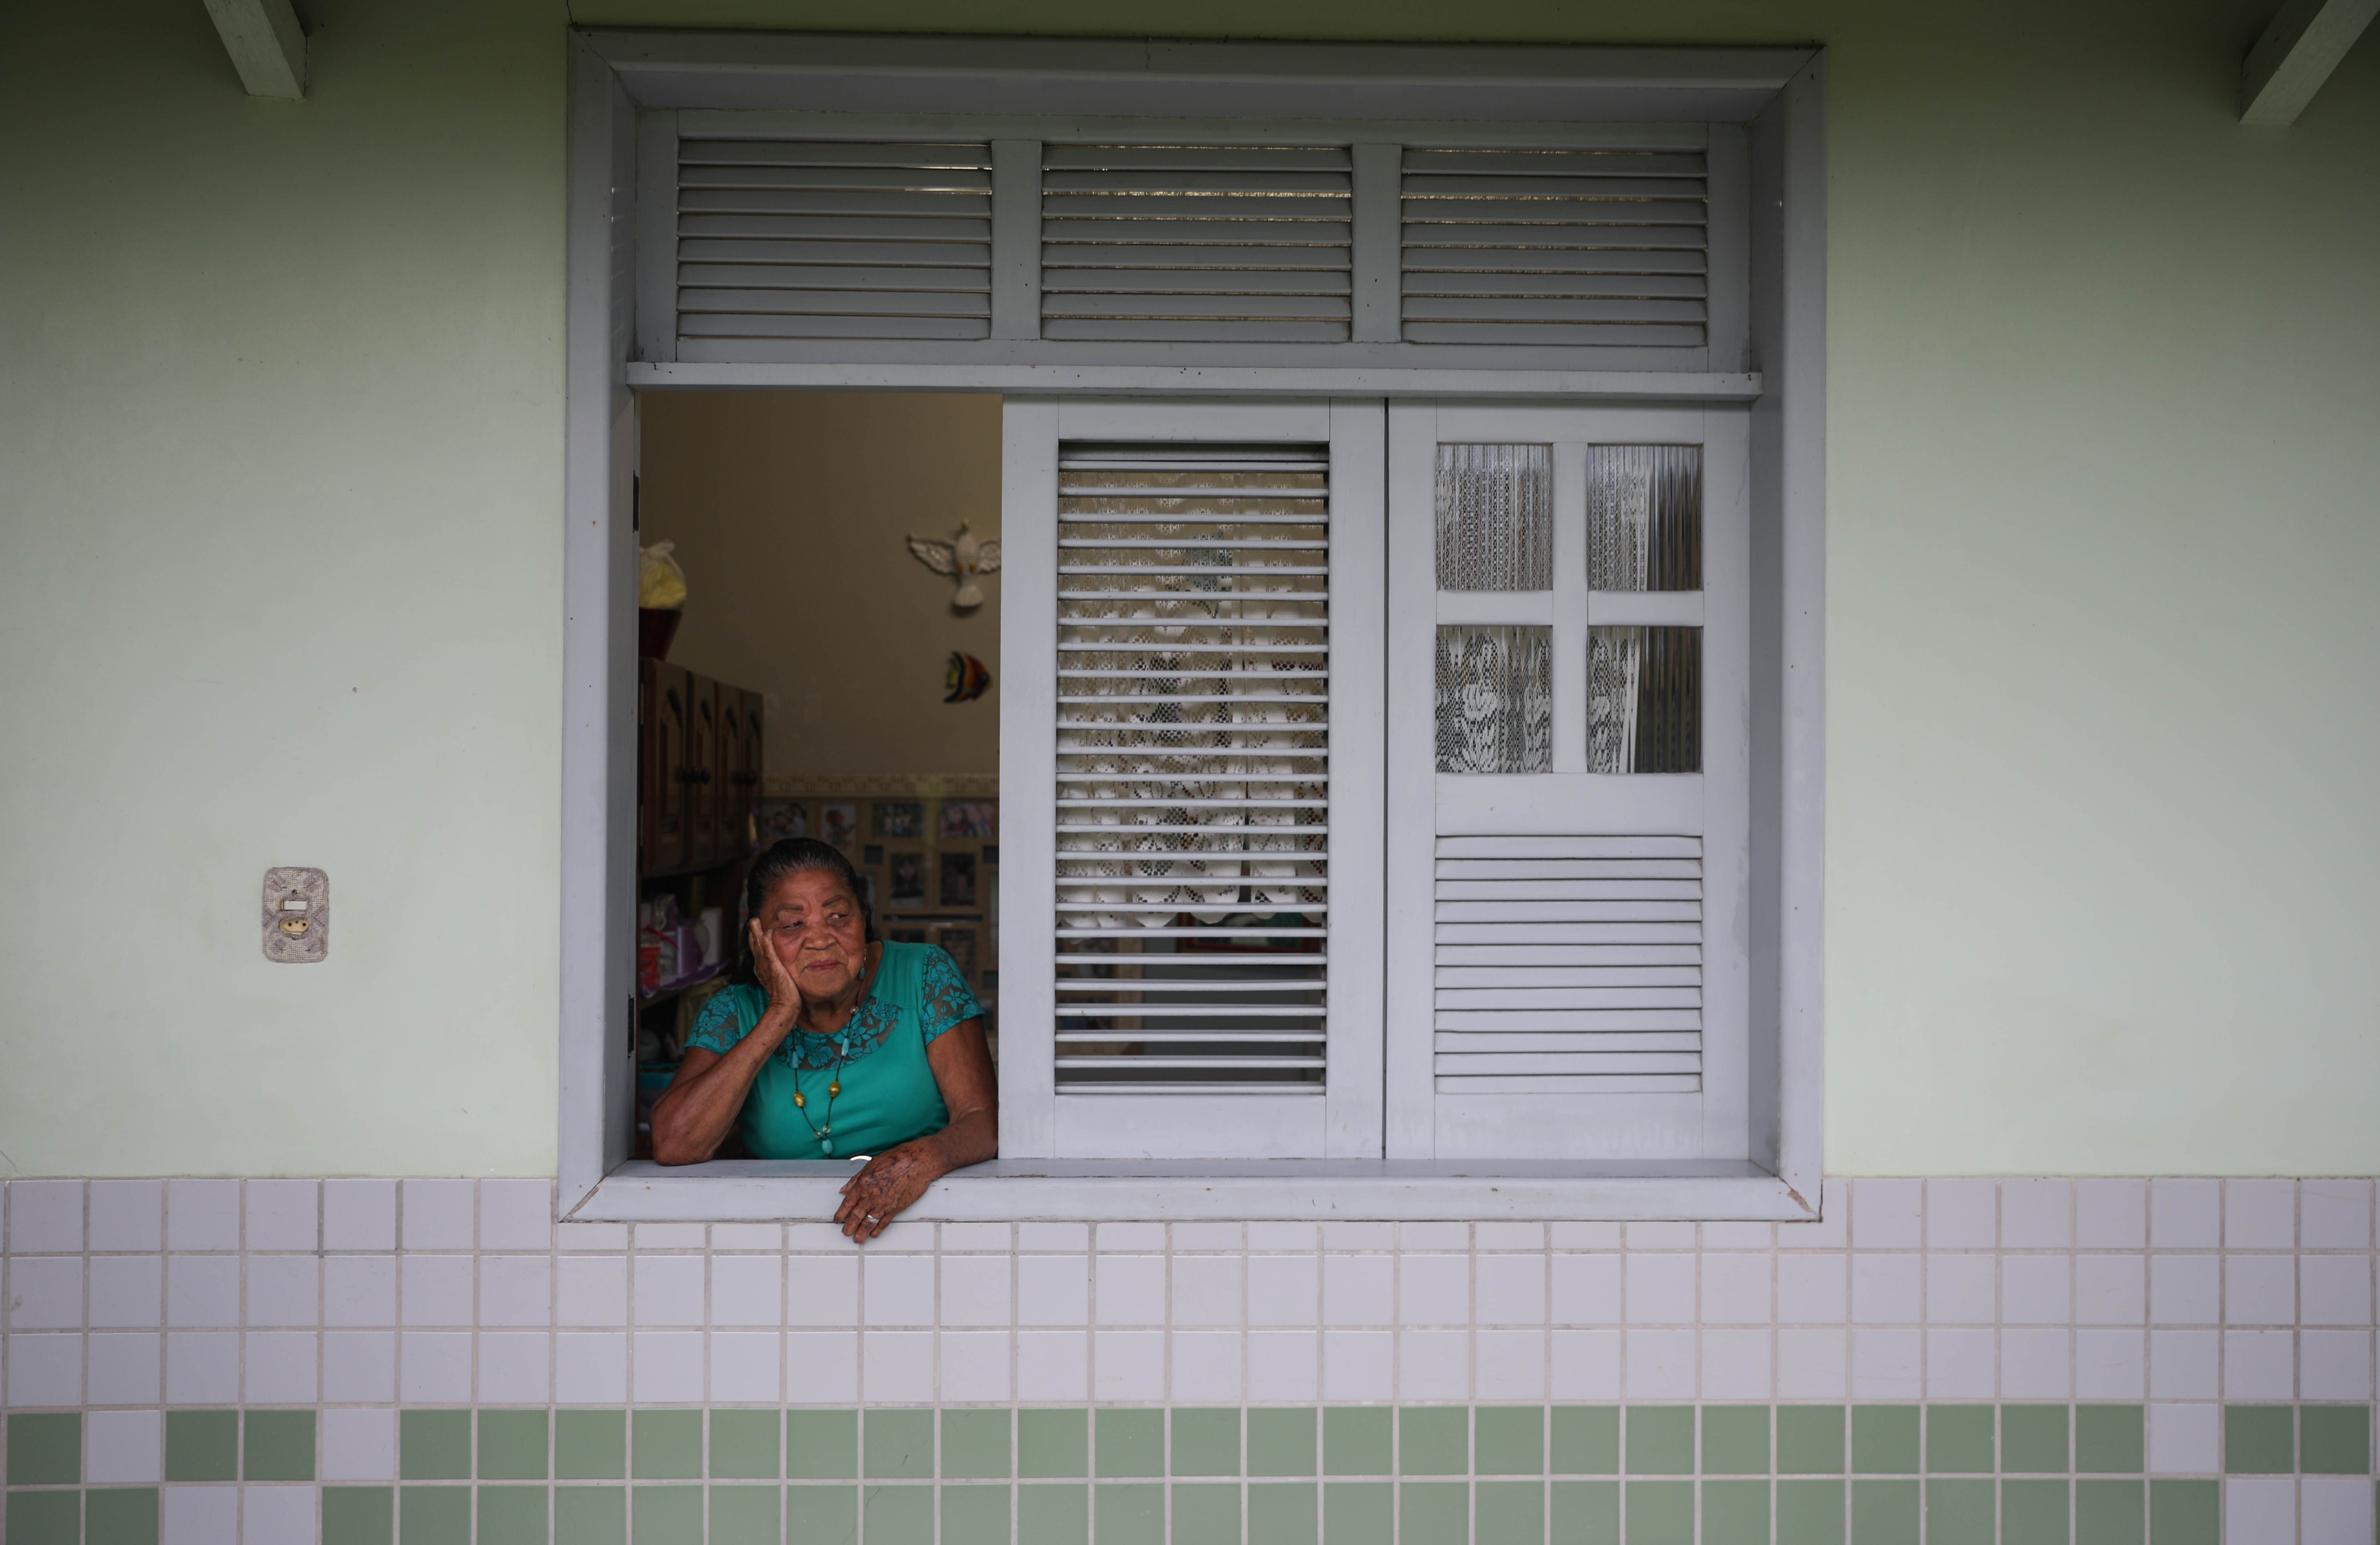 Maria da Silva Trindade peeks out of her living room window to chat with the other residents of Marituba’s former leprosy colony. Trindade was diagnosed with the disease at the age of 15, and she moved into the colony the same year. Nearly 80 years later she’s still there. Image by Anton L. Delgado. Brazil, 2020.